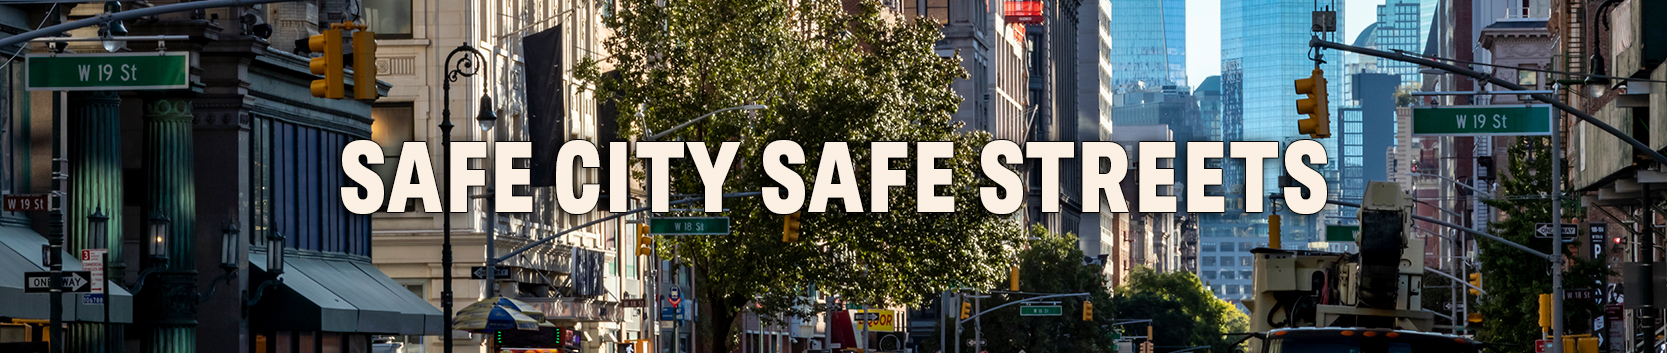 19th street image with text overlaid that reads "SAFE  CITY SAFE STREETS"